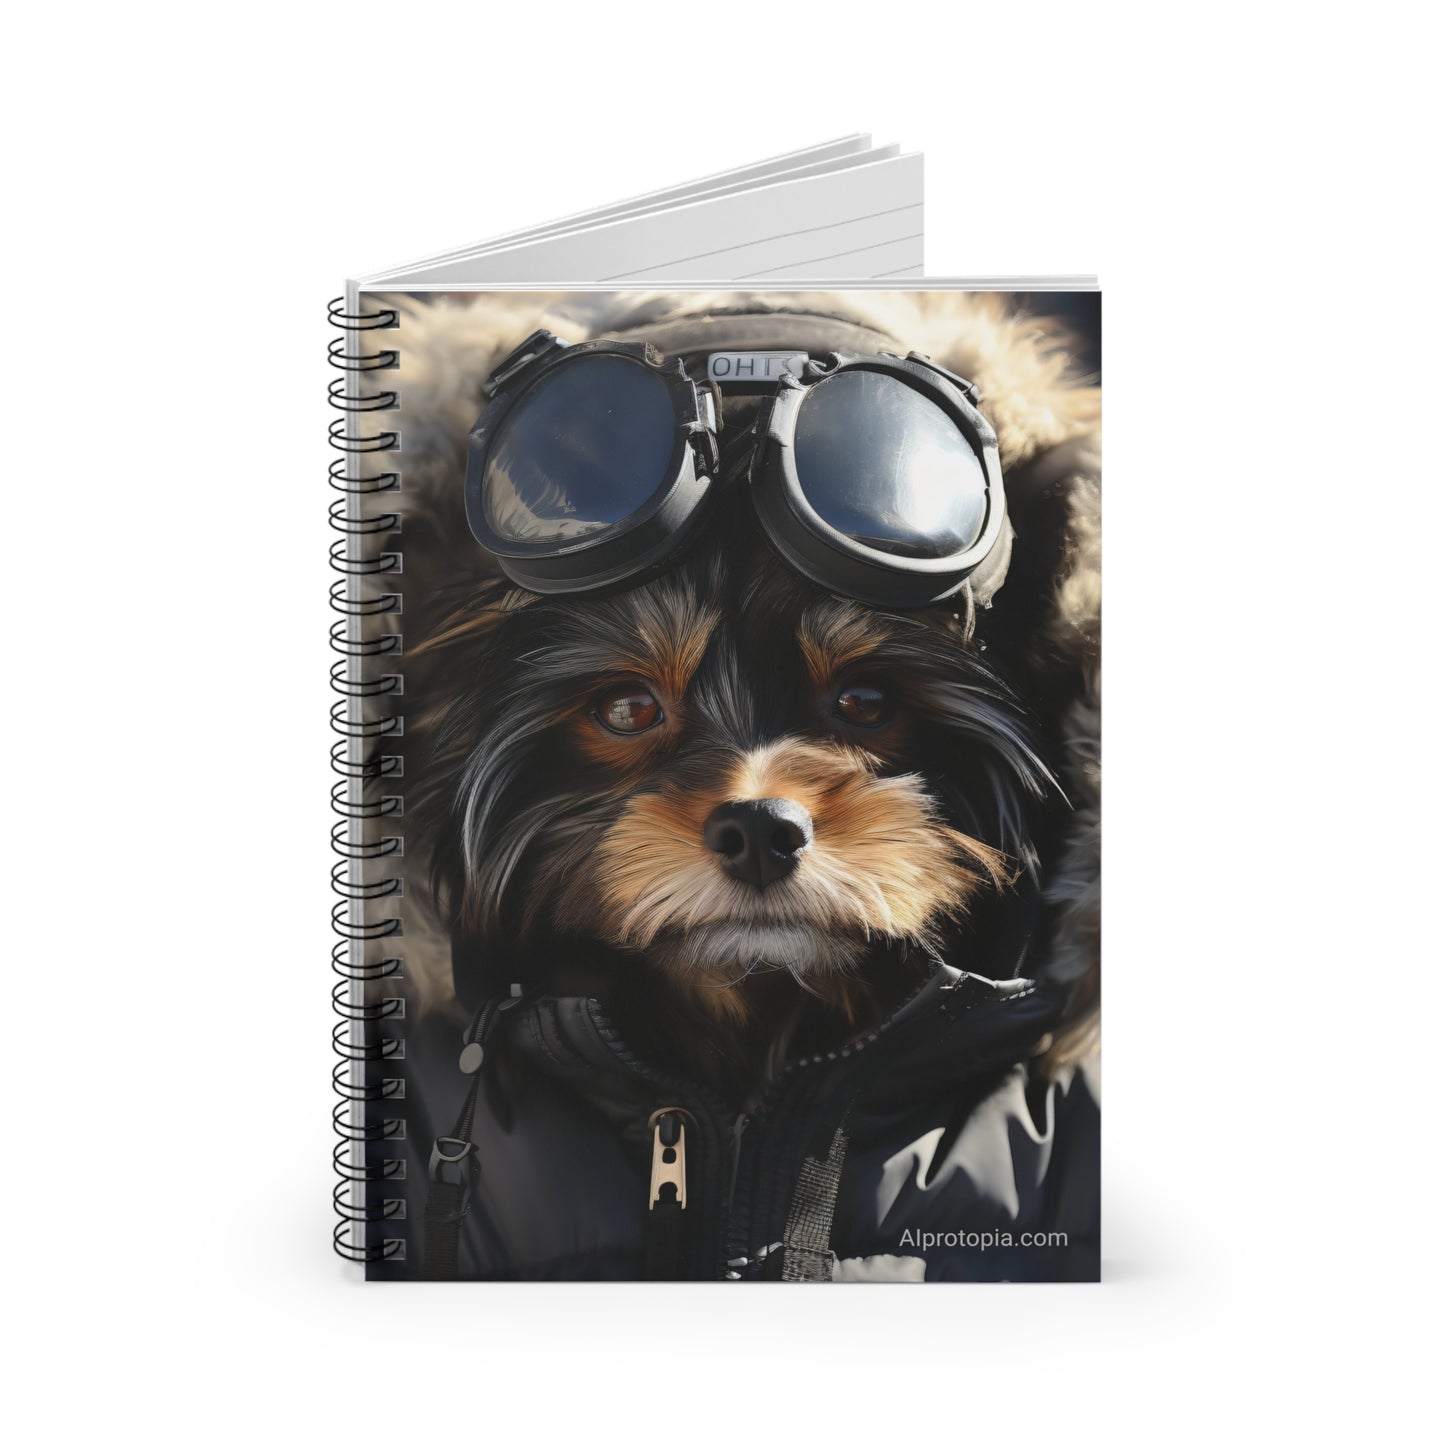 Arctic Yorkie Spiral Notebook - Ruled Line. Dogs. Yorkie. Pets.